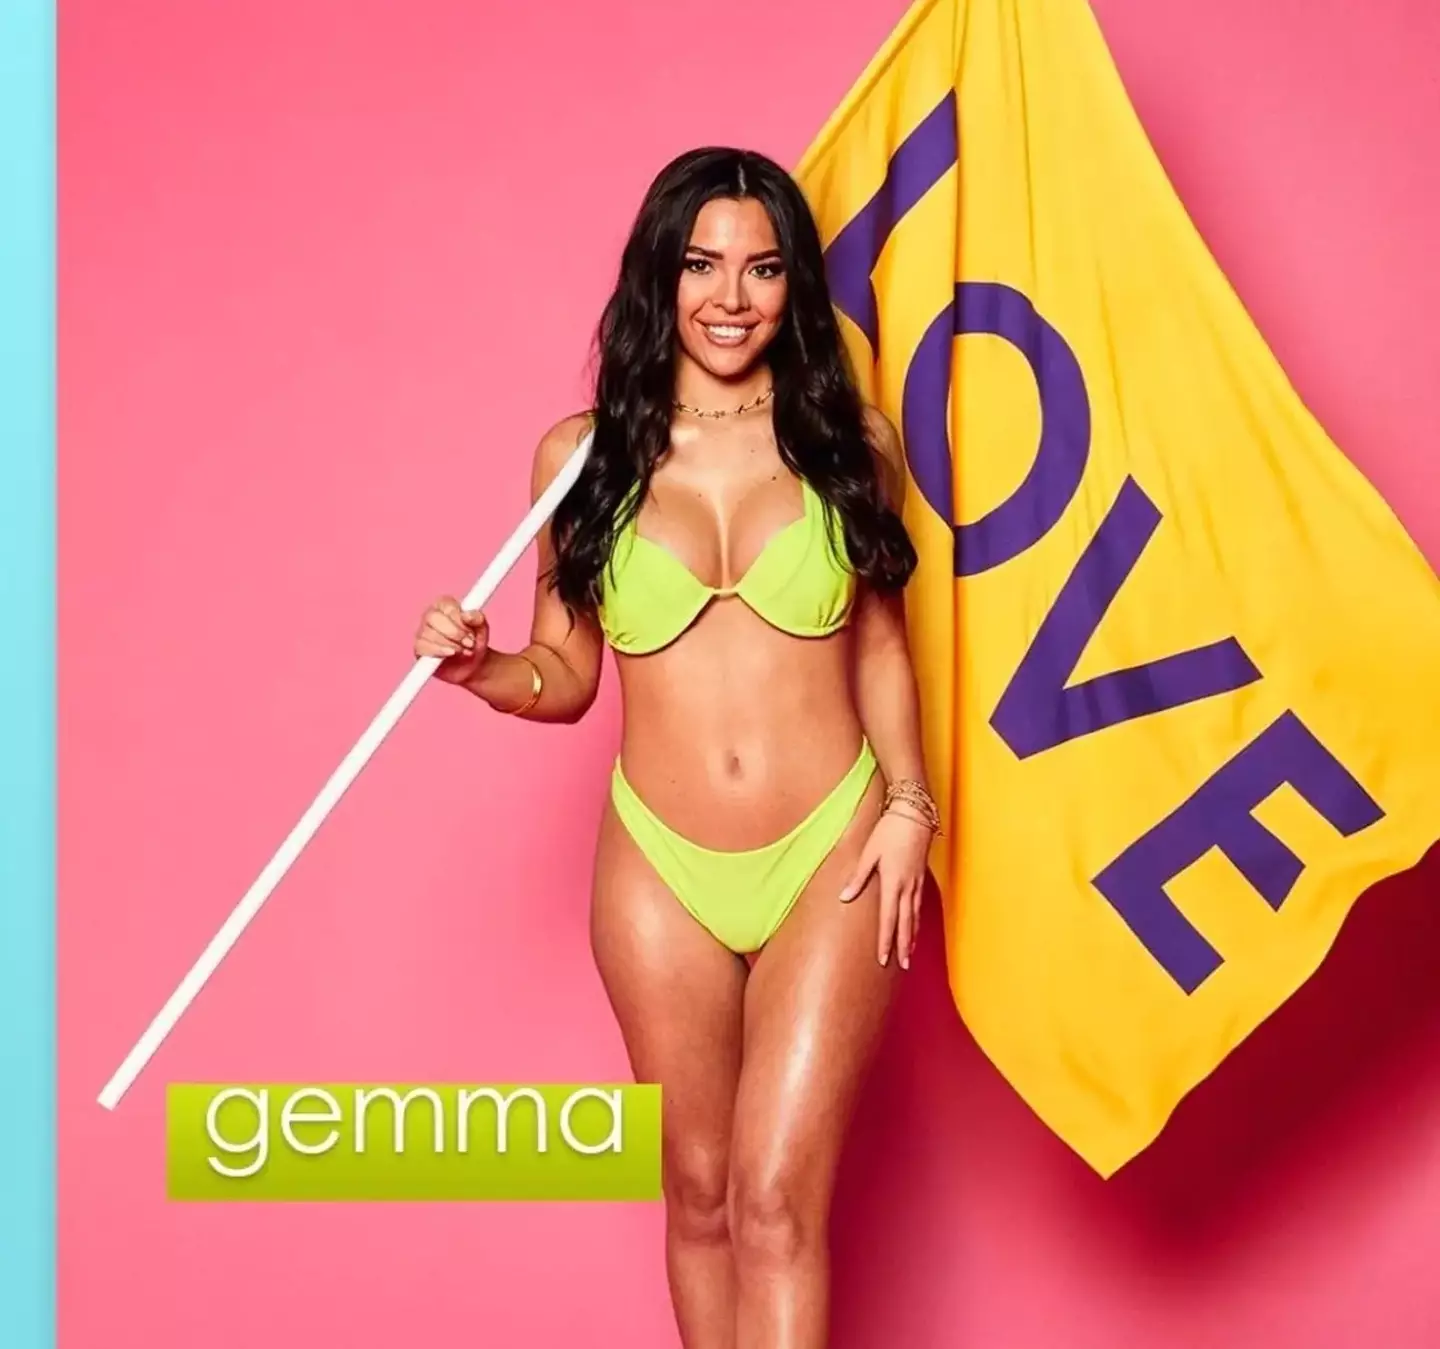 Gemma Owen has been criticised as being 'too young' to be on ITV's Love Island.